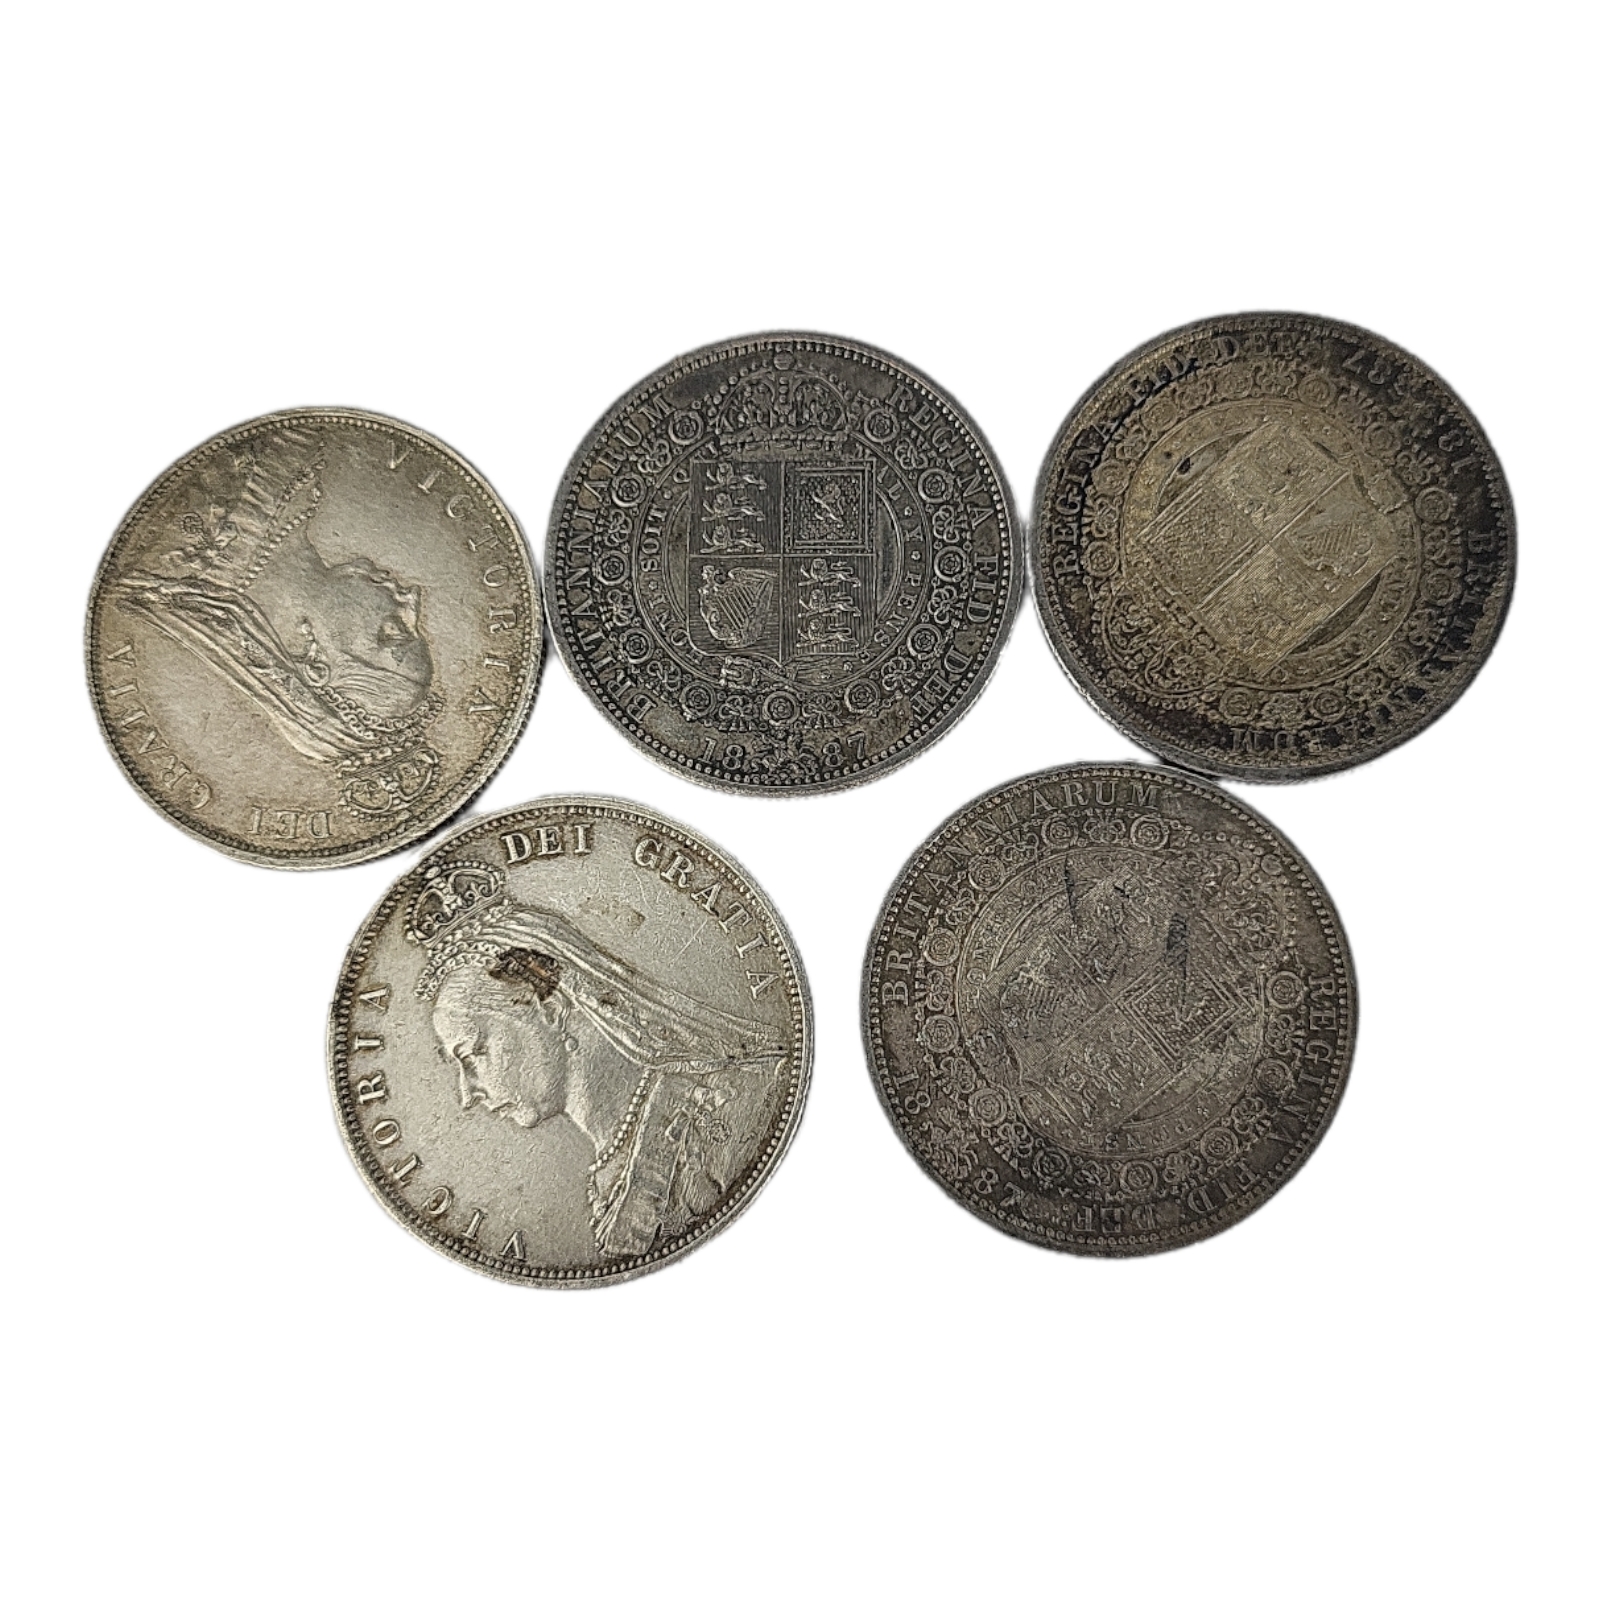 A COLLECTION OF FIVE VICTORIAN SILVER HALF CROWN COINS, DATED 1887 Shield design verso. (approx 3cm,